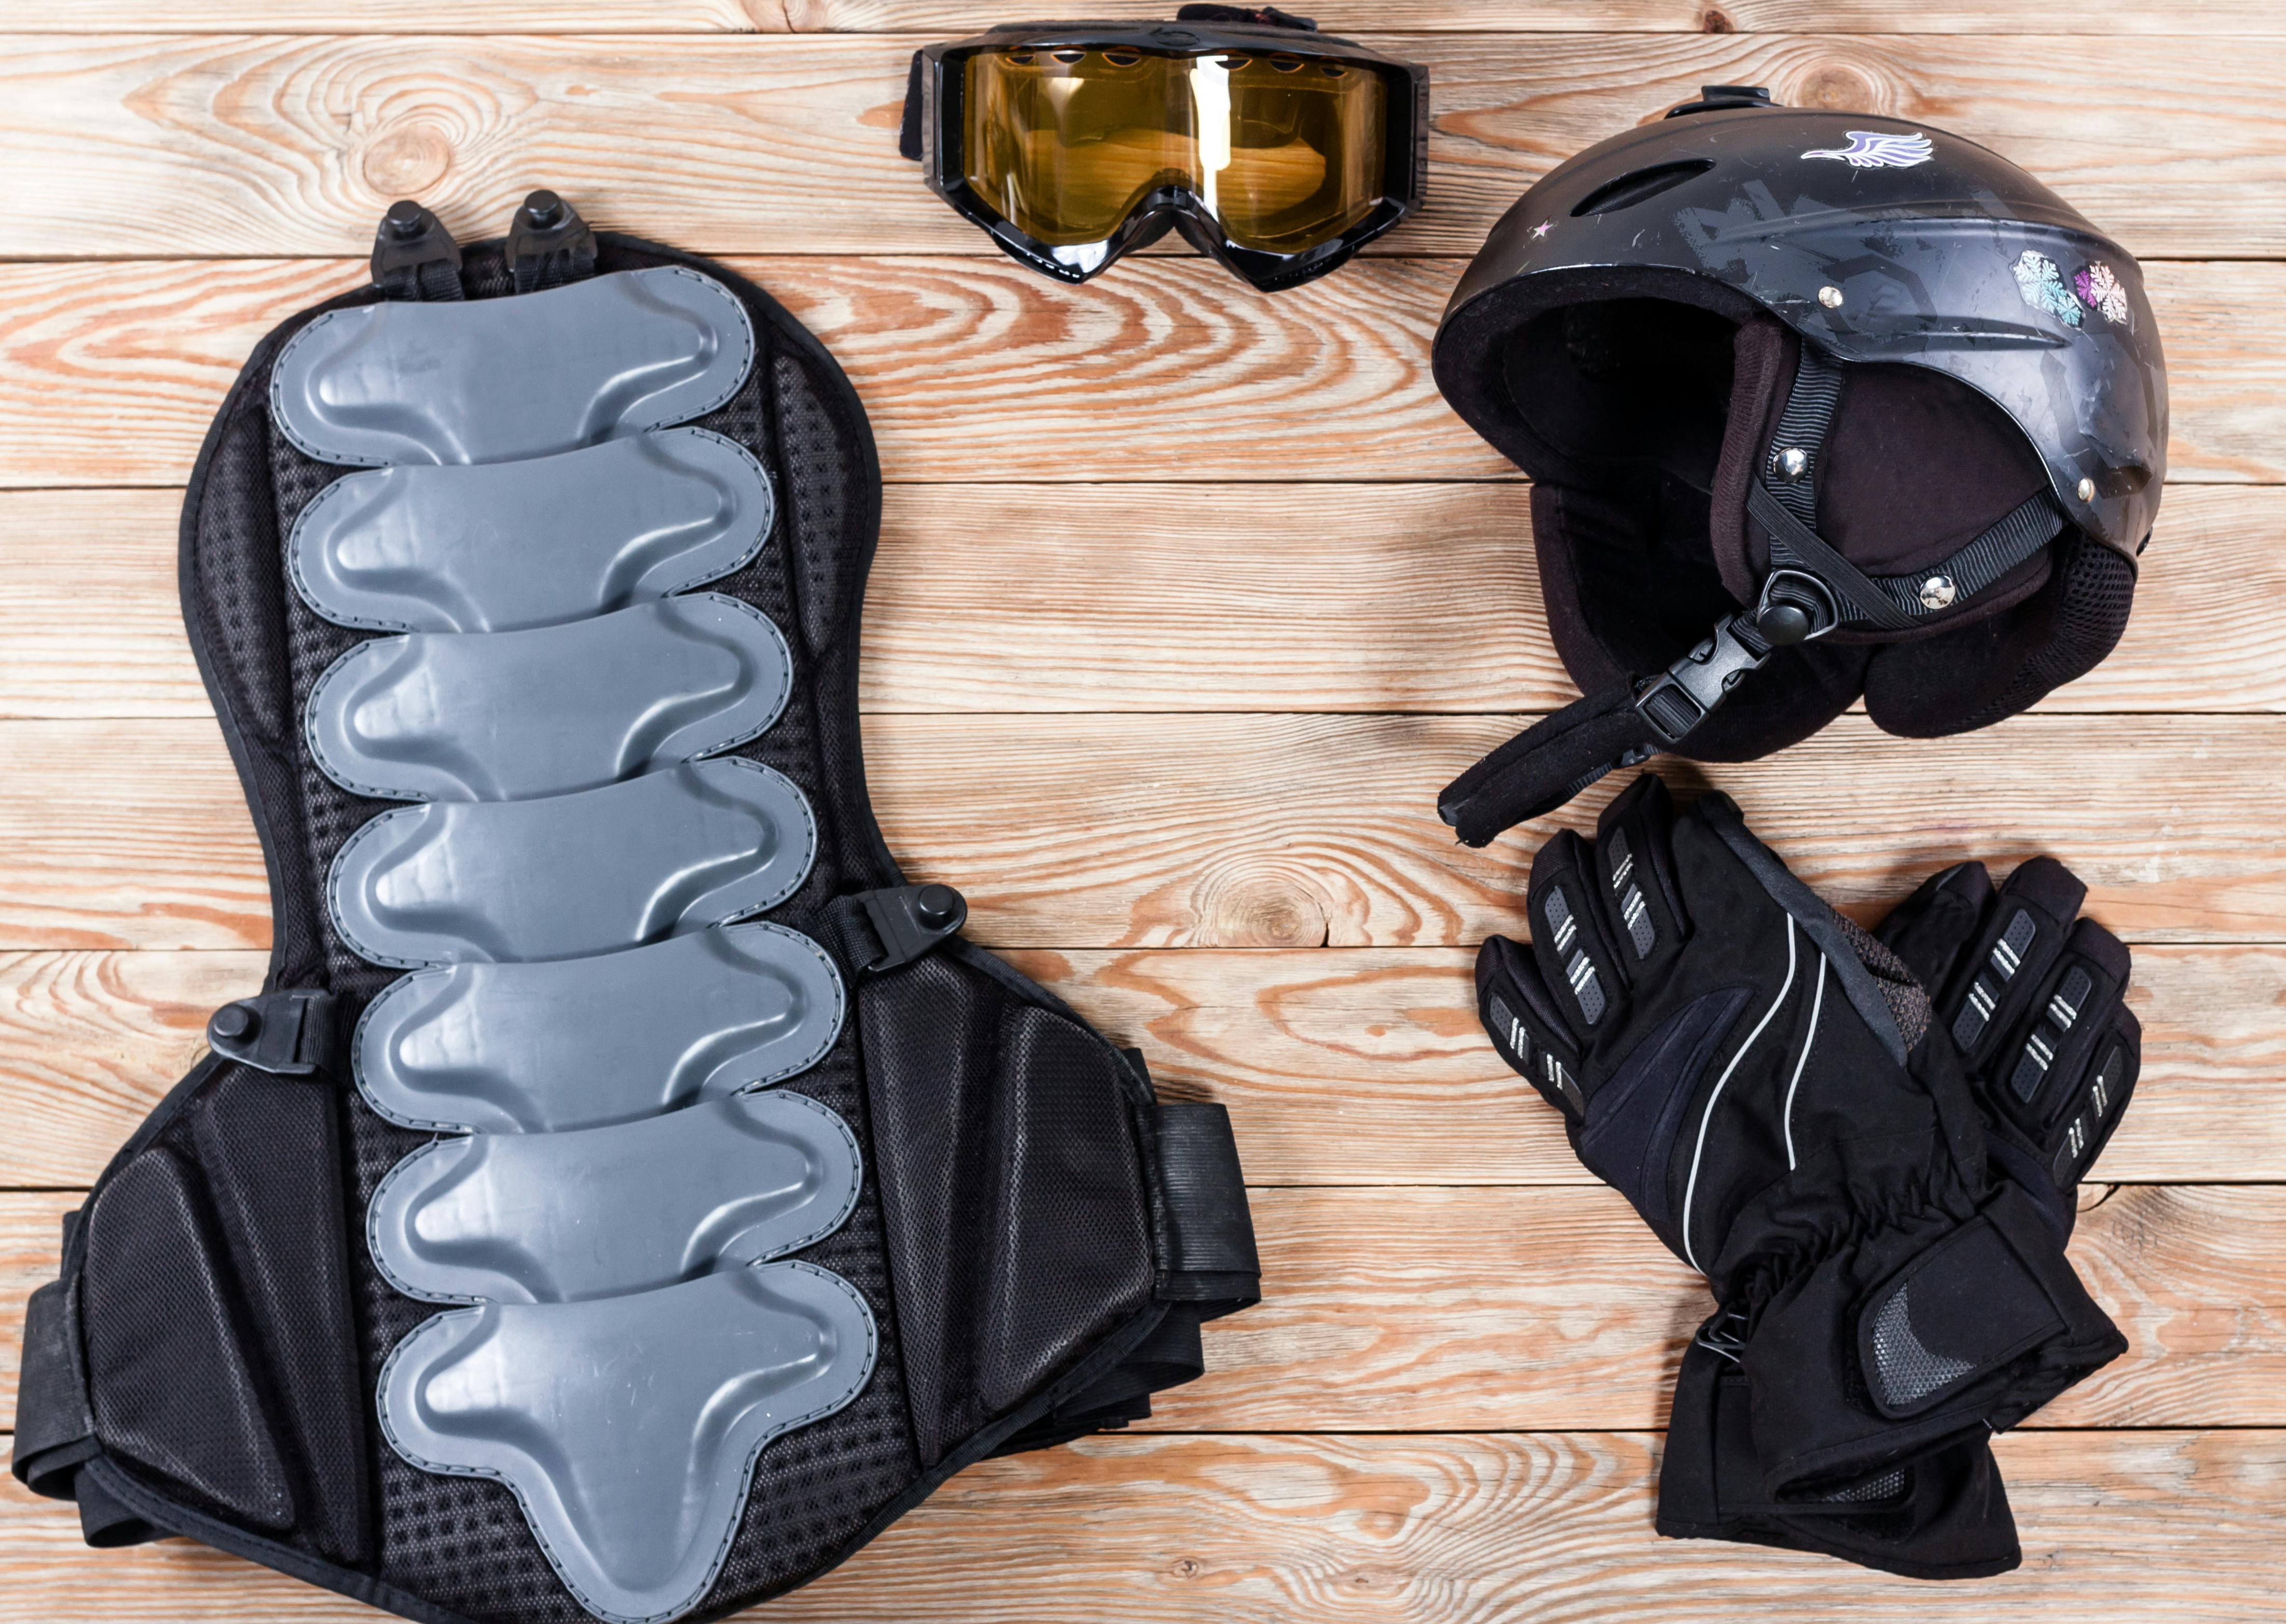 Protective gear for skiing